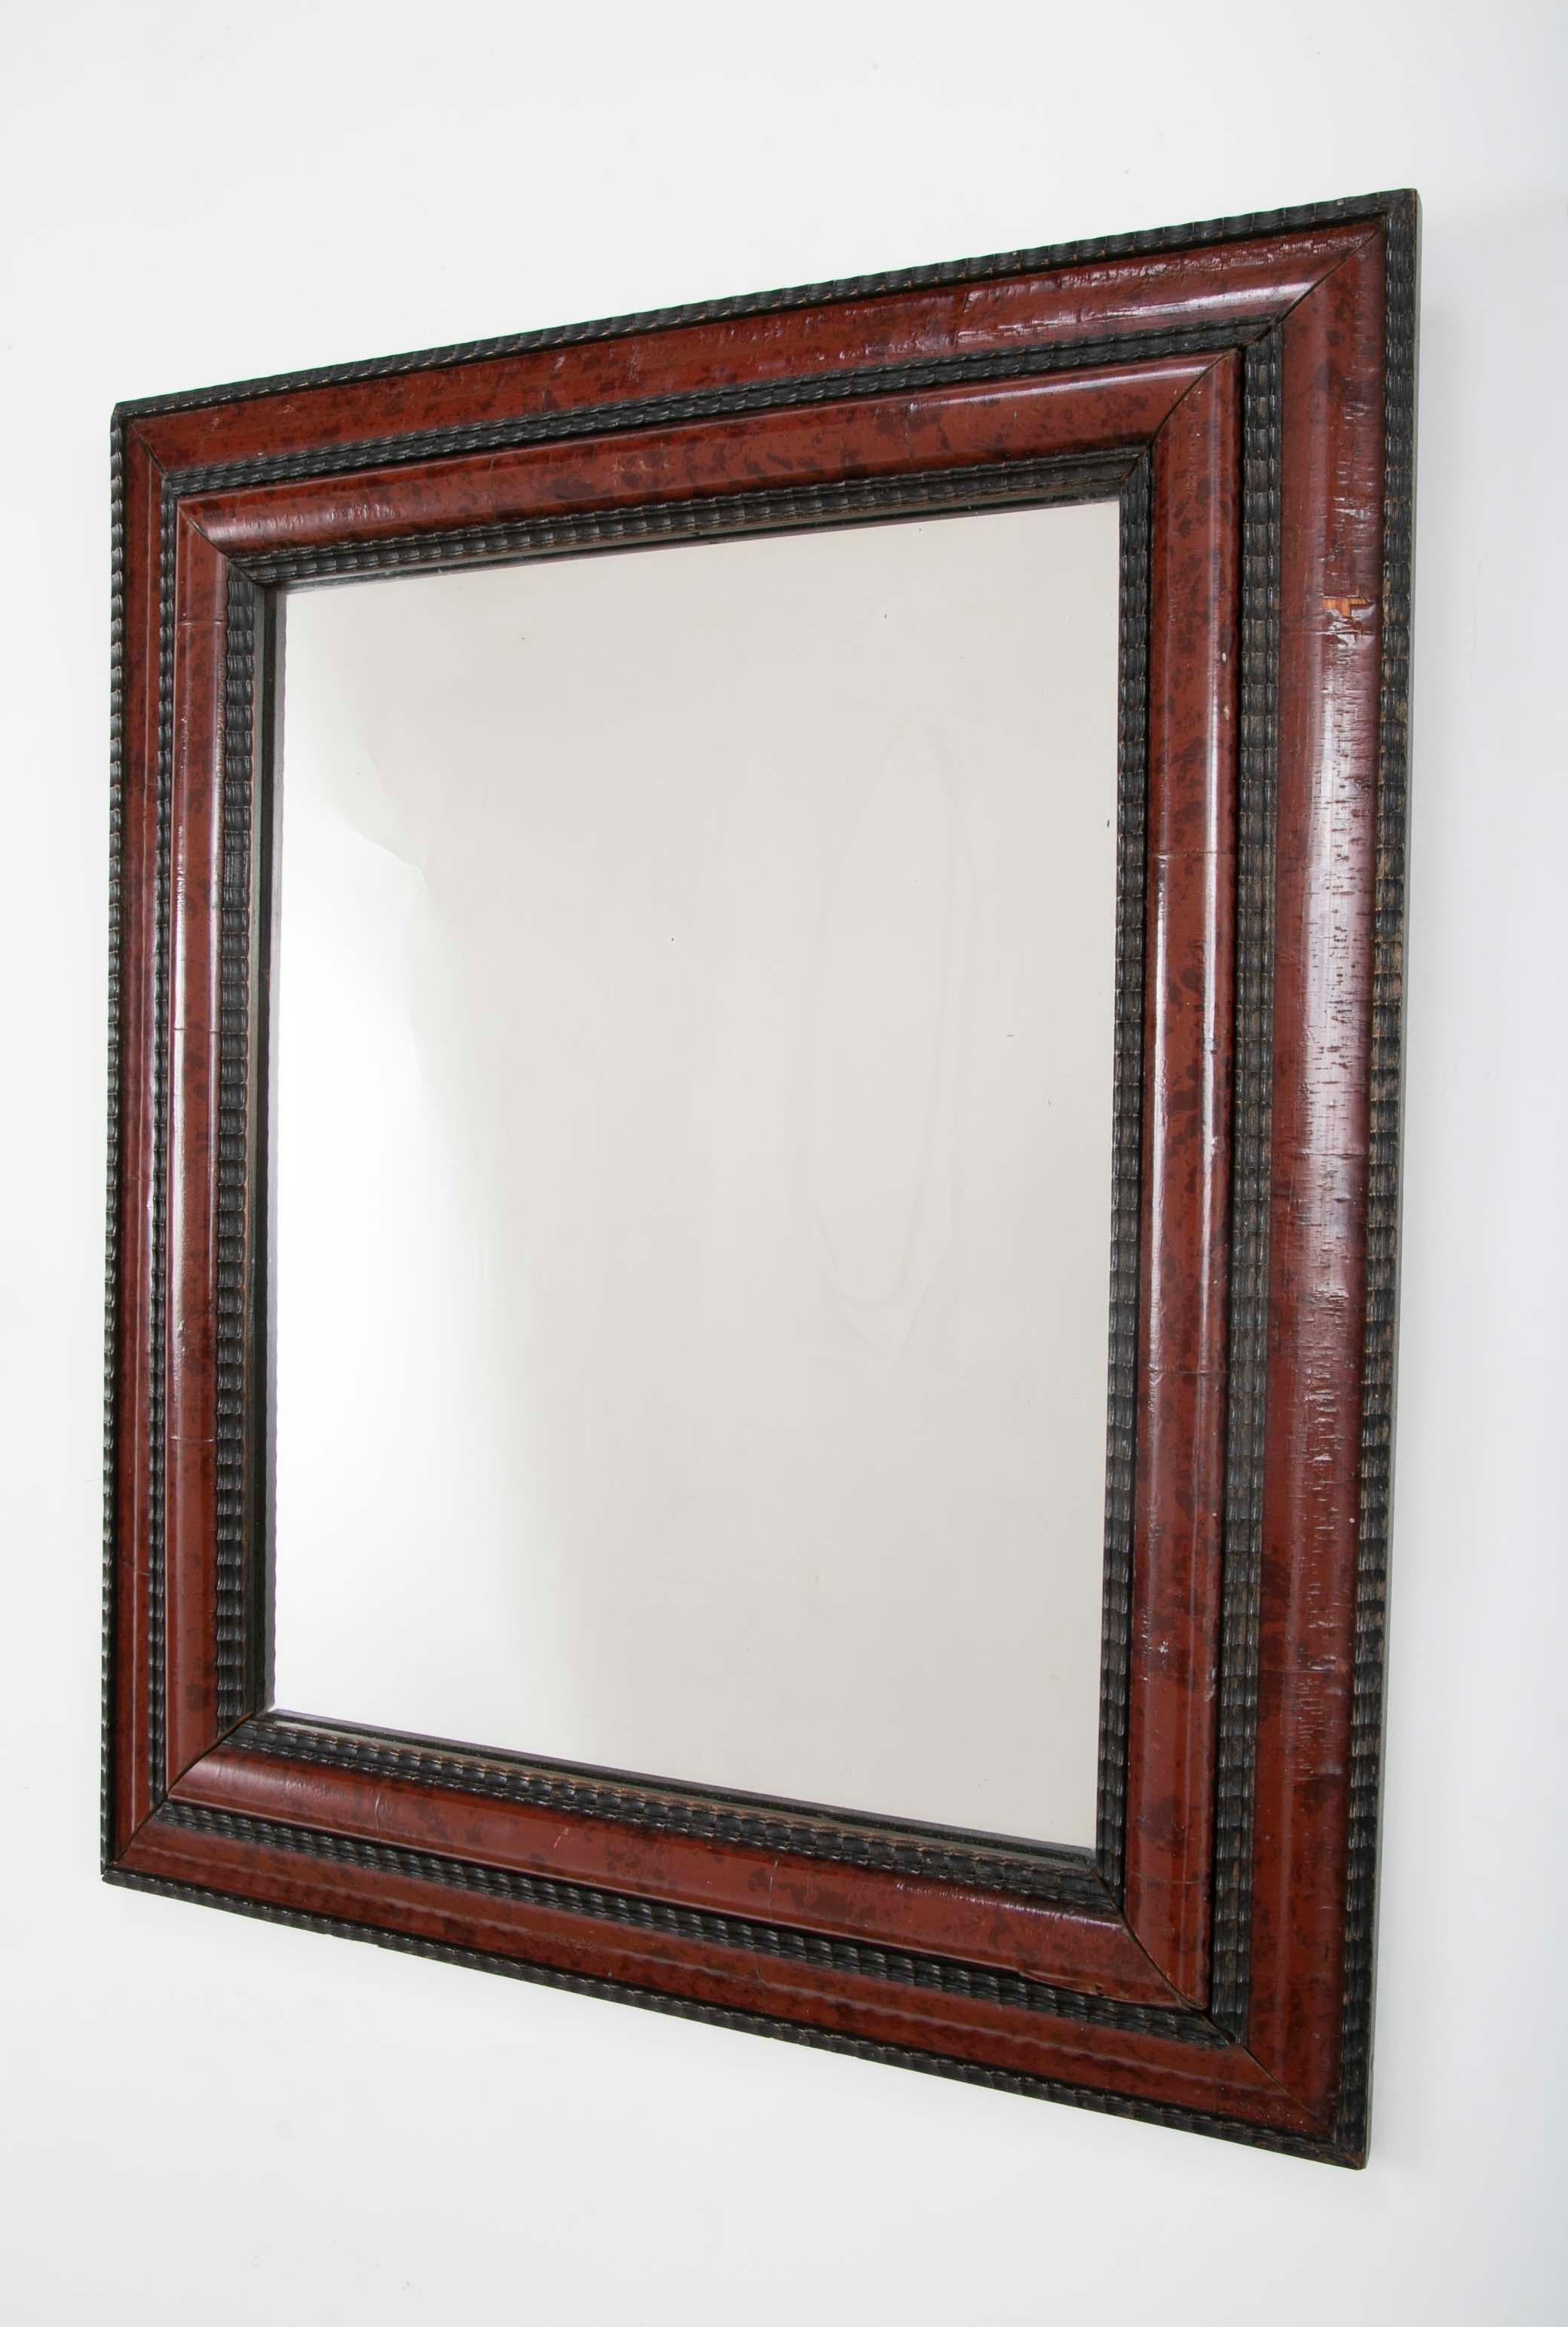 Baroque Dutch Mirror with Ebonized and Faux Tortoise Shell Frame